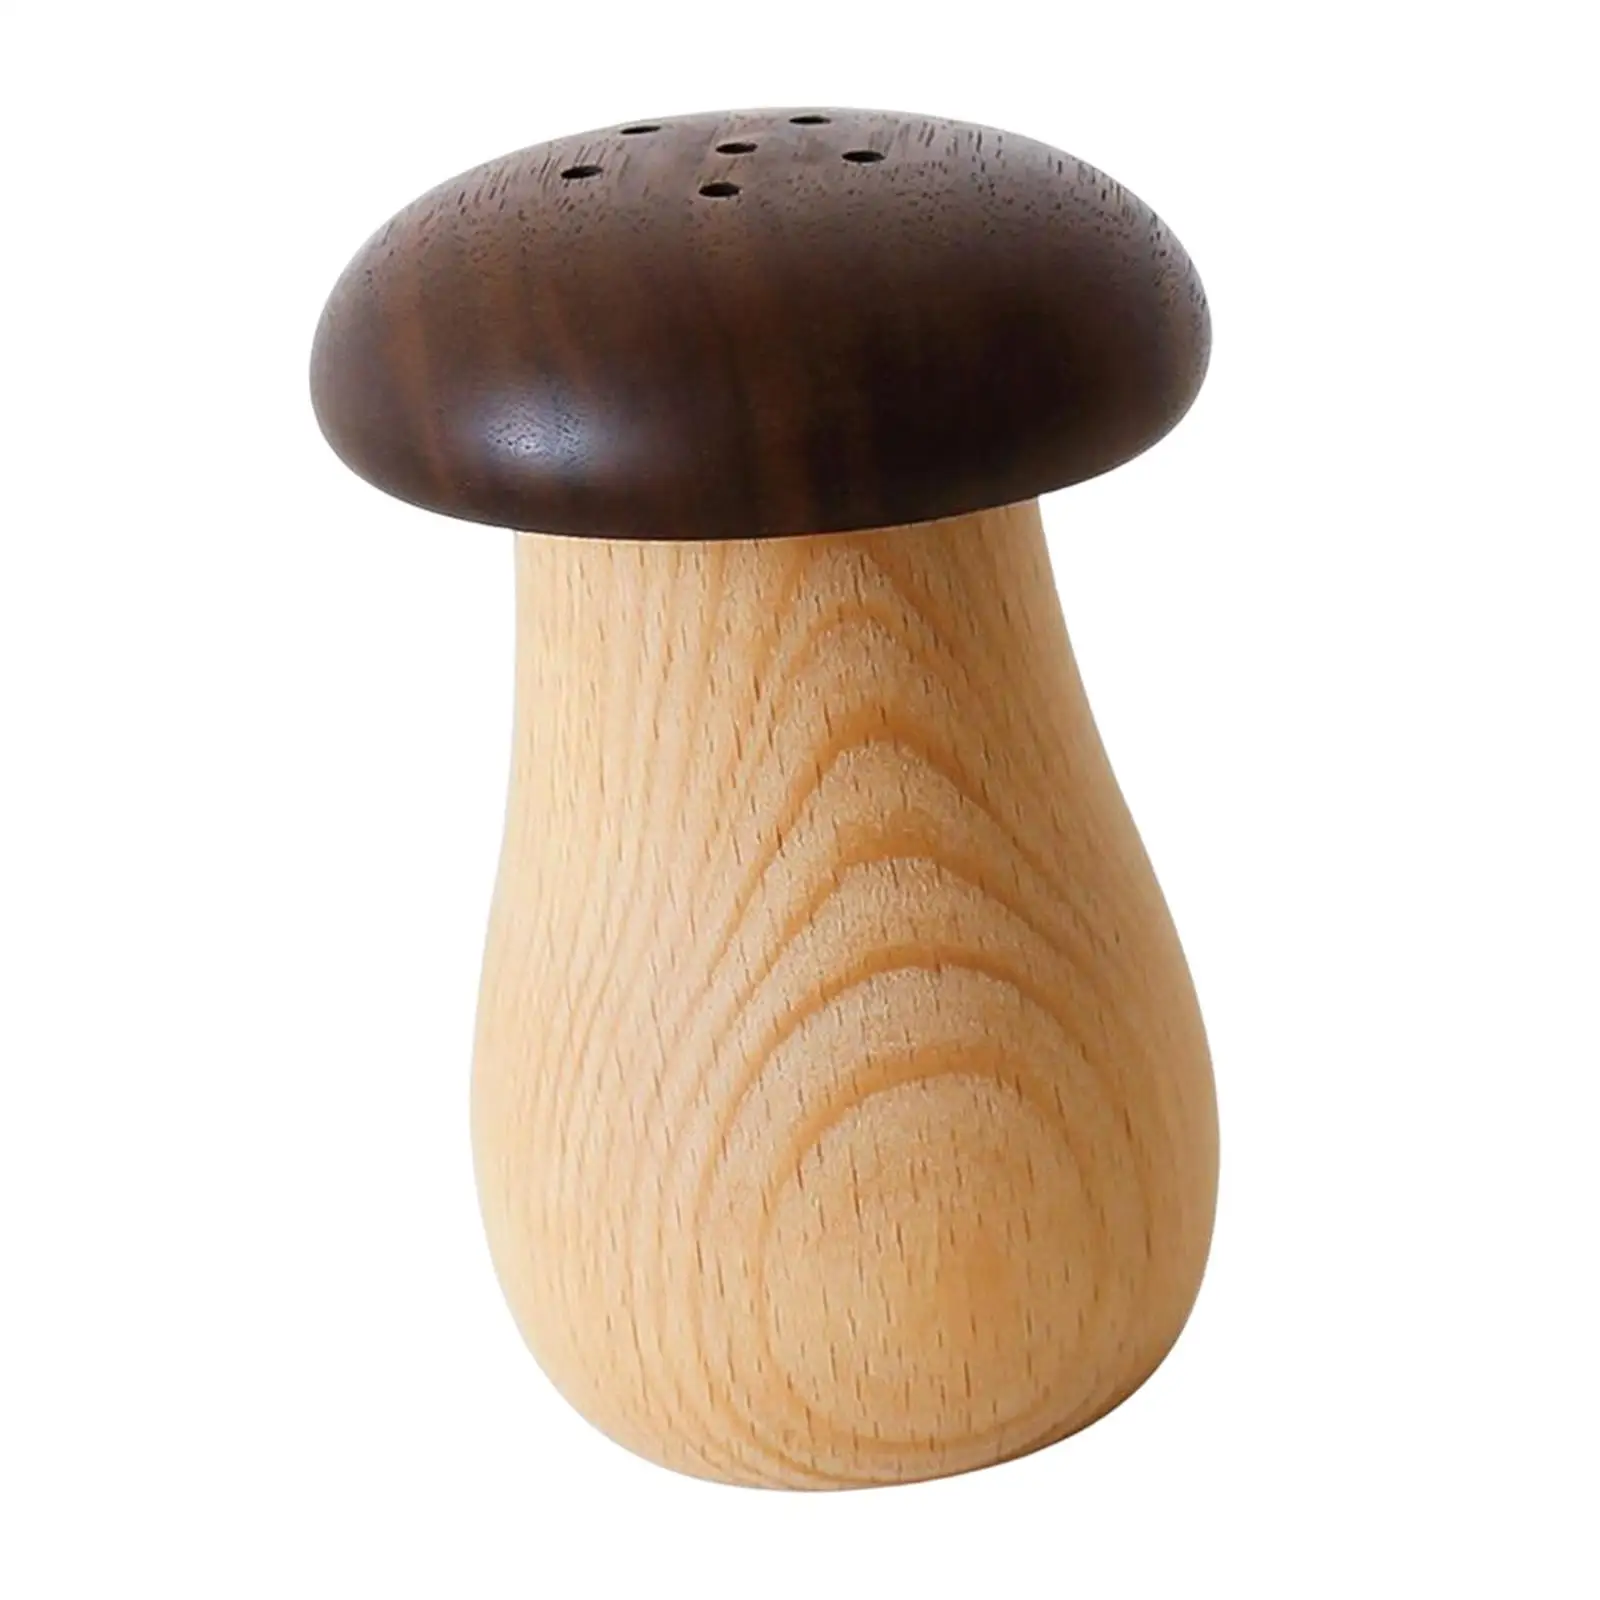 Portable Toothpick Dispenser Mushroom Toothpick Box Container Toothpick Holder Cute for Restaurants Kitchen Bars Hotels Gifts